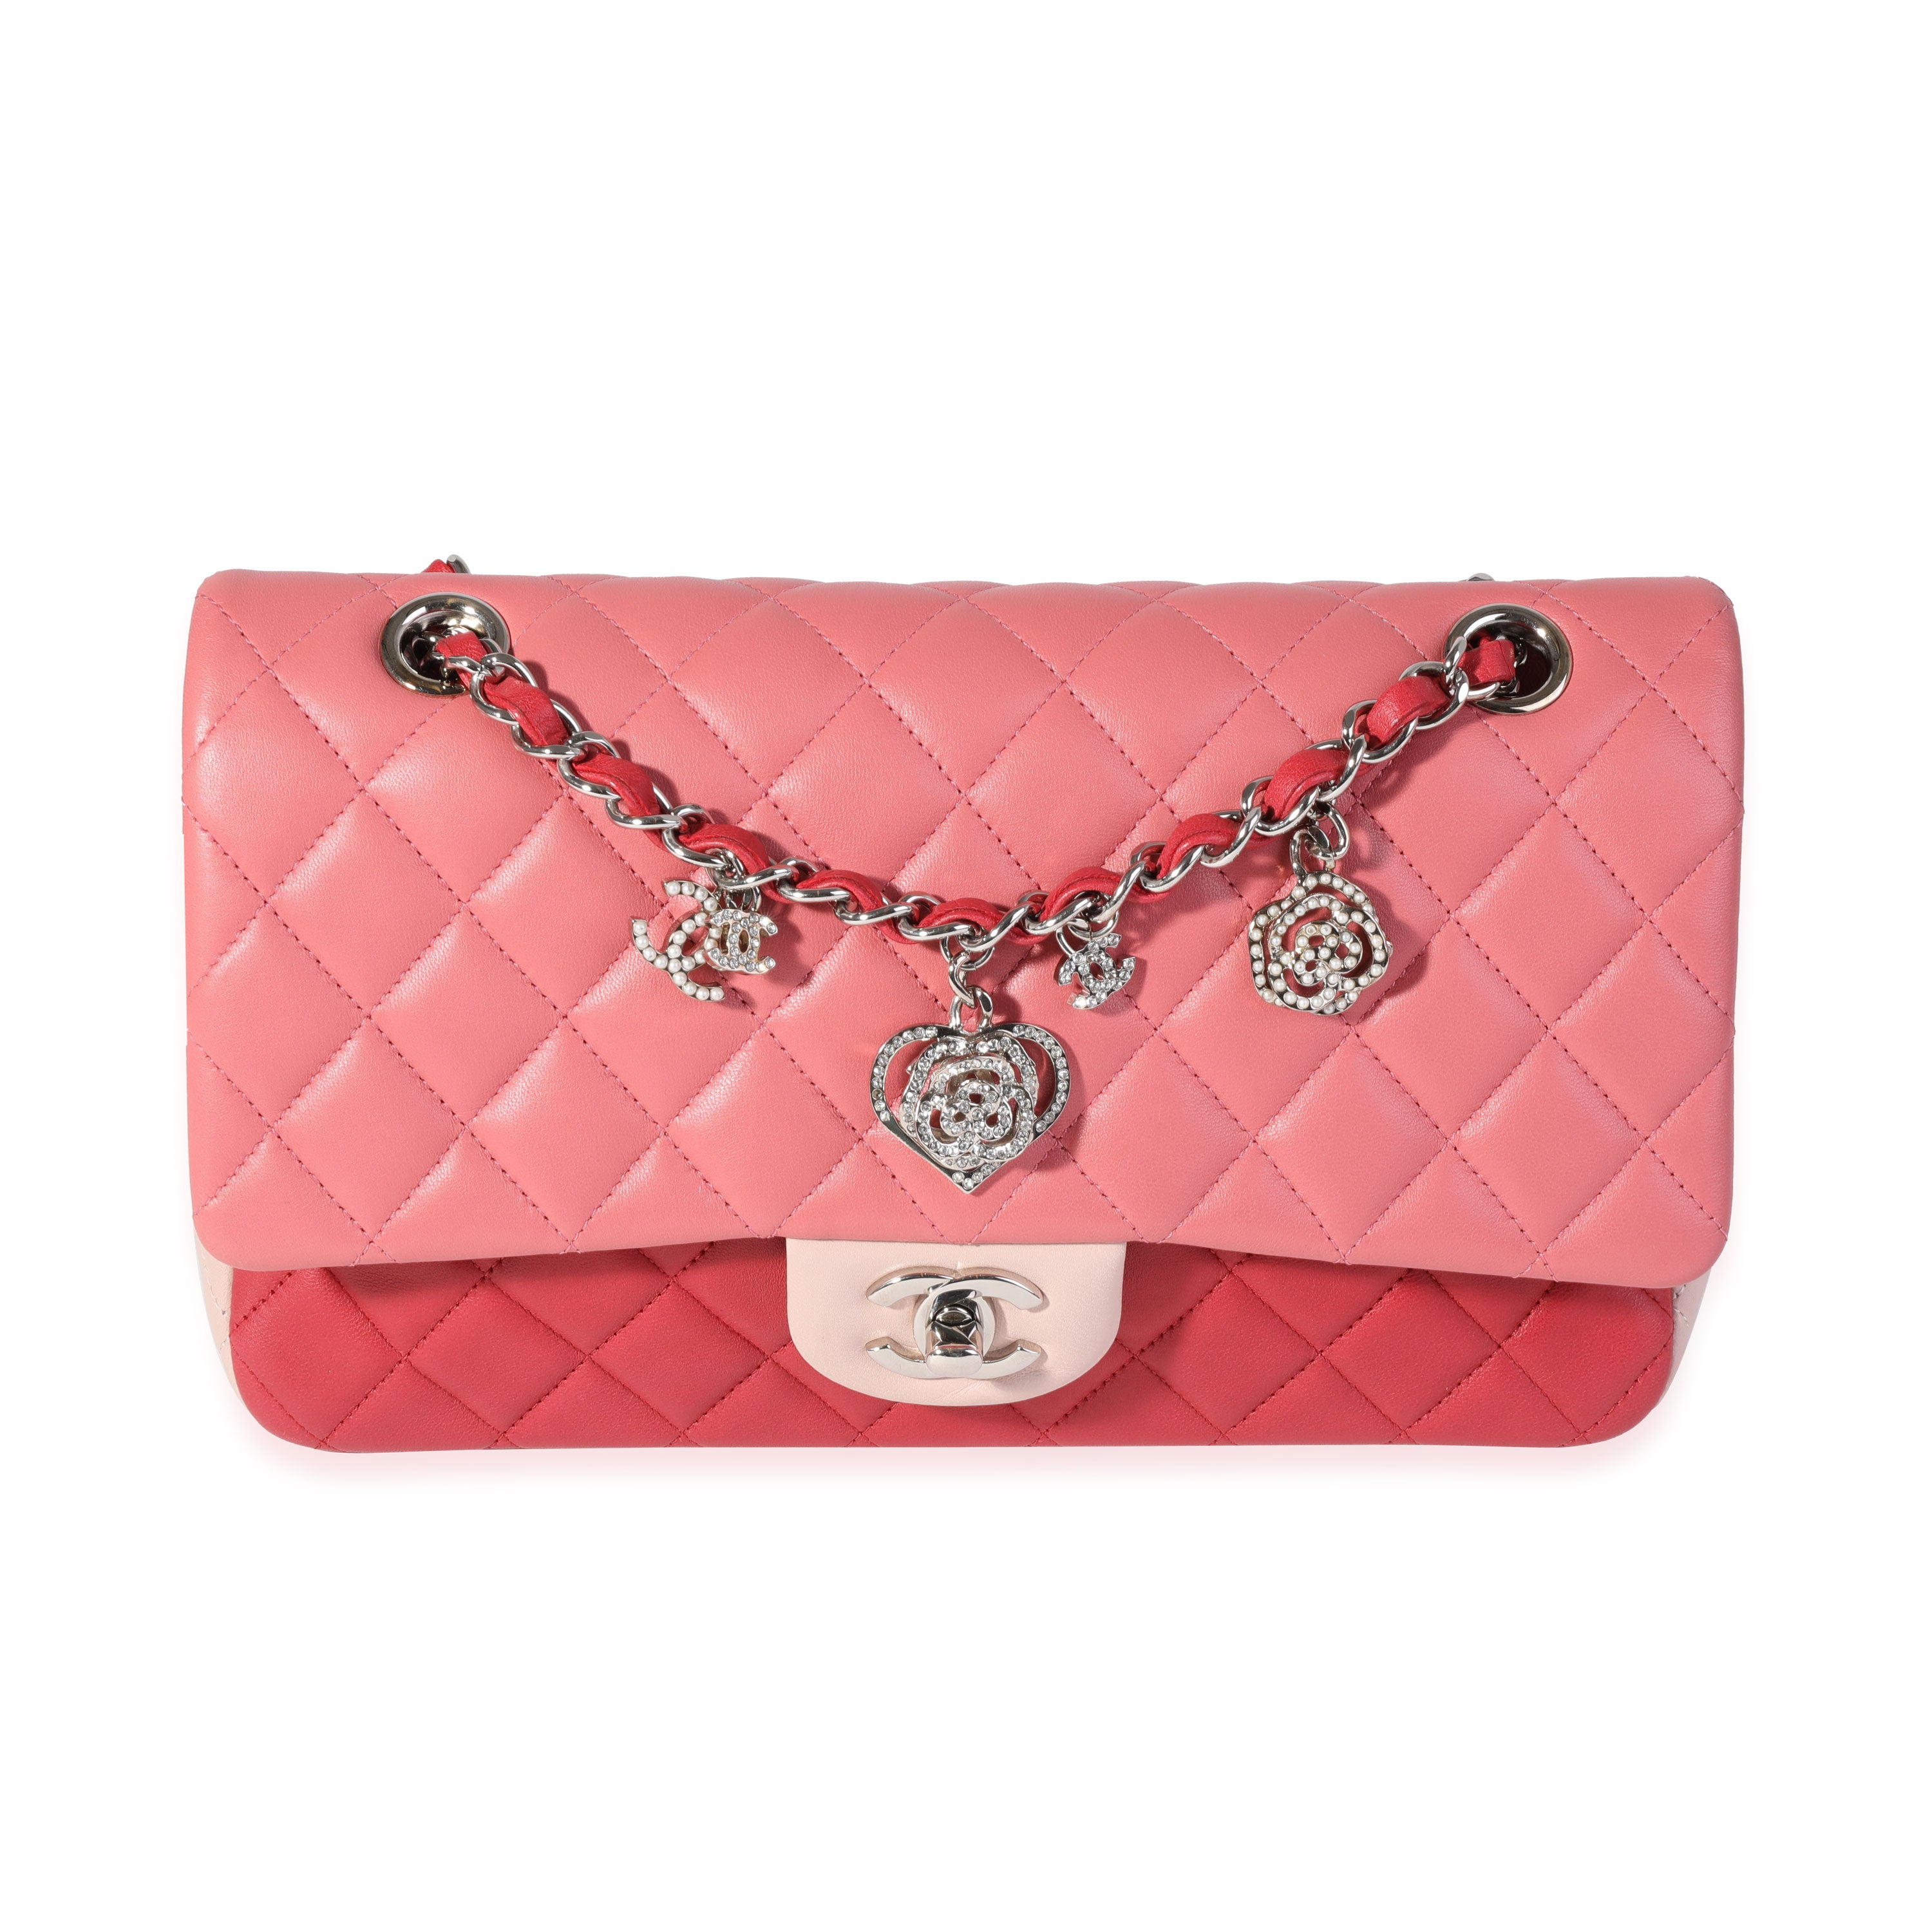 CHANEL, Bags, Chanel Classic Rectangular Mini Valentine Charm Tricolor  Pink Red Flap Bag